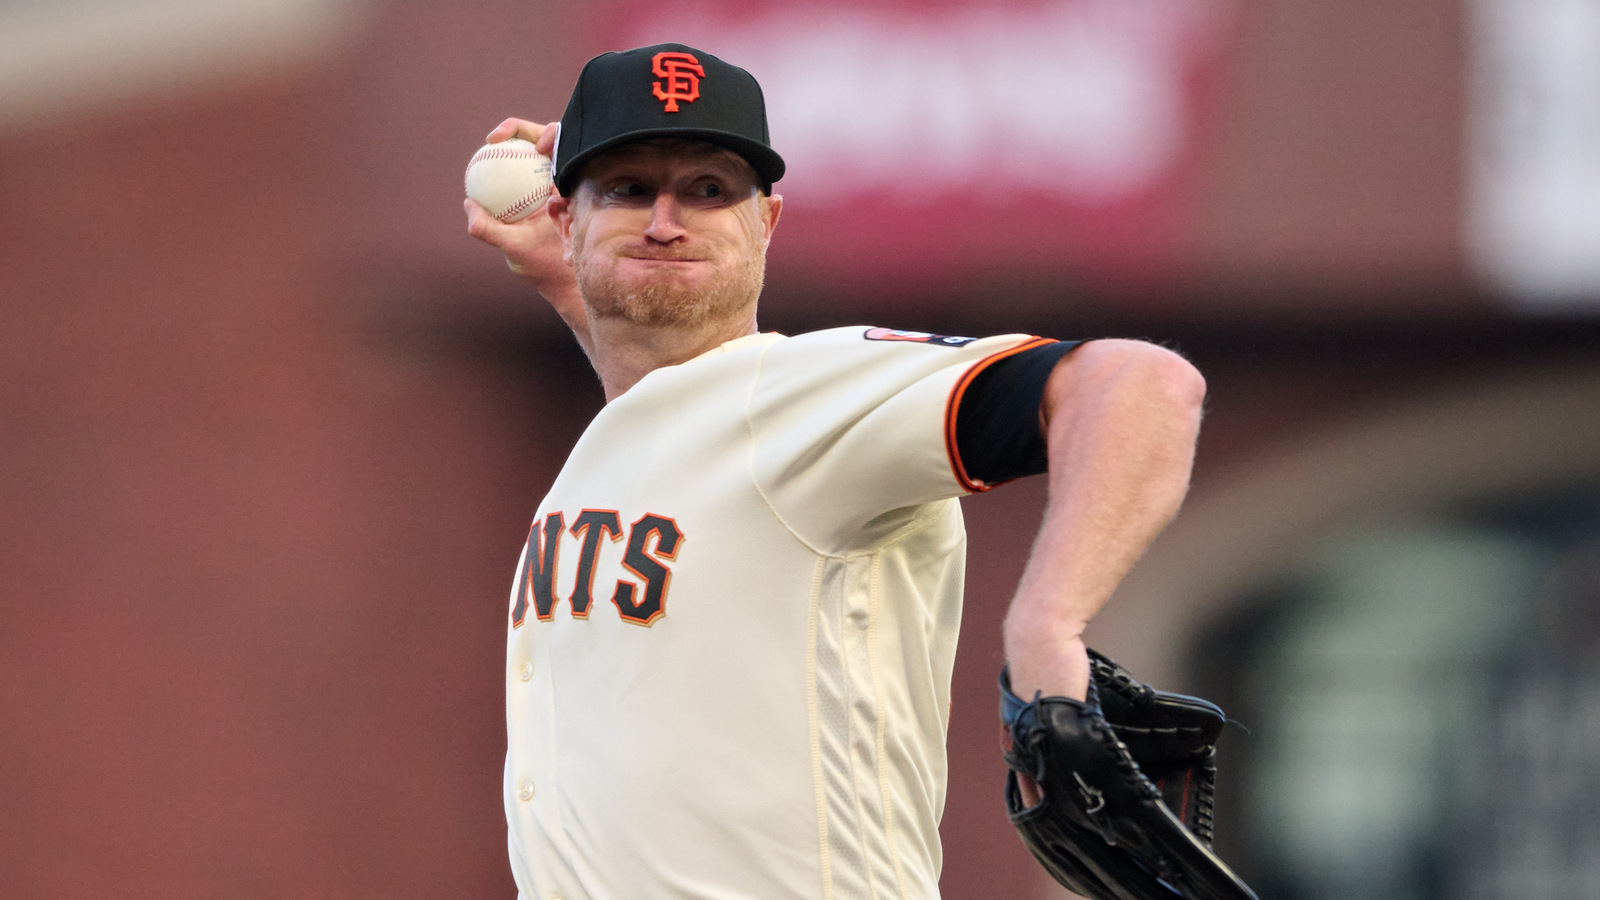 Giants All-Star starting pitcher to undergo hip surgery